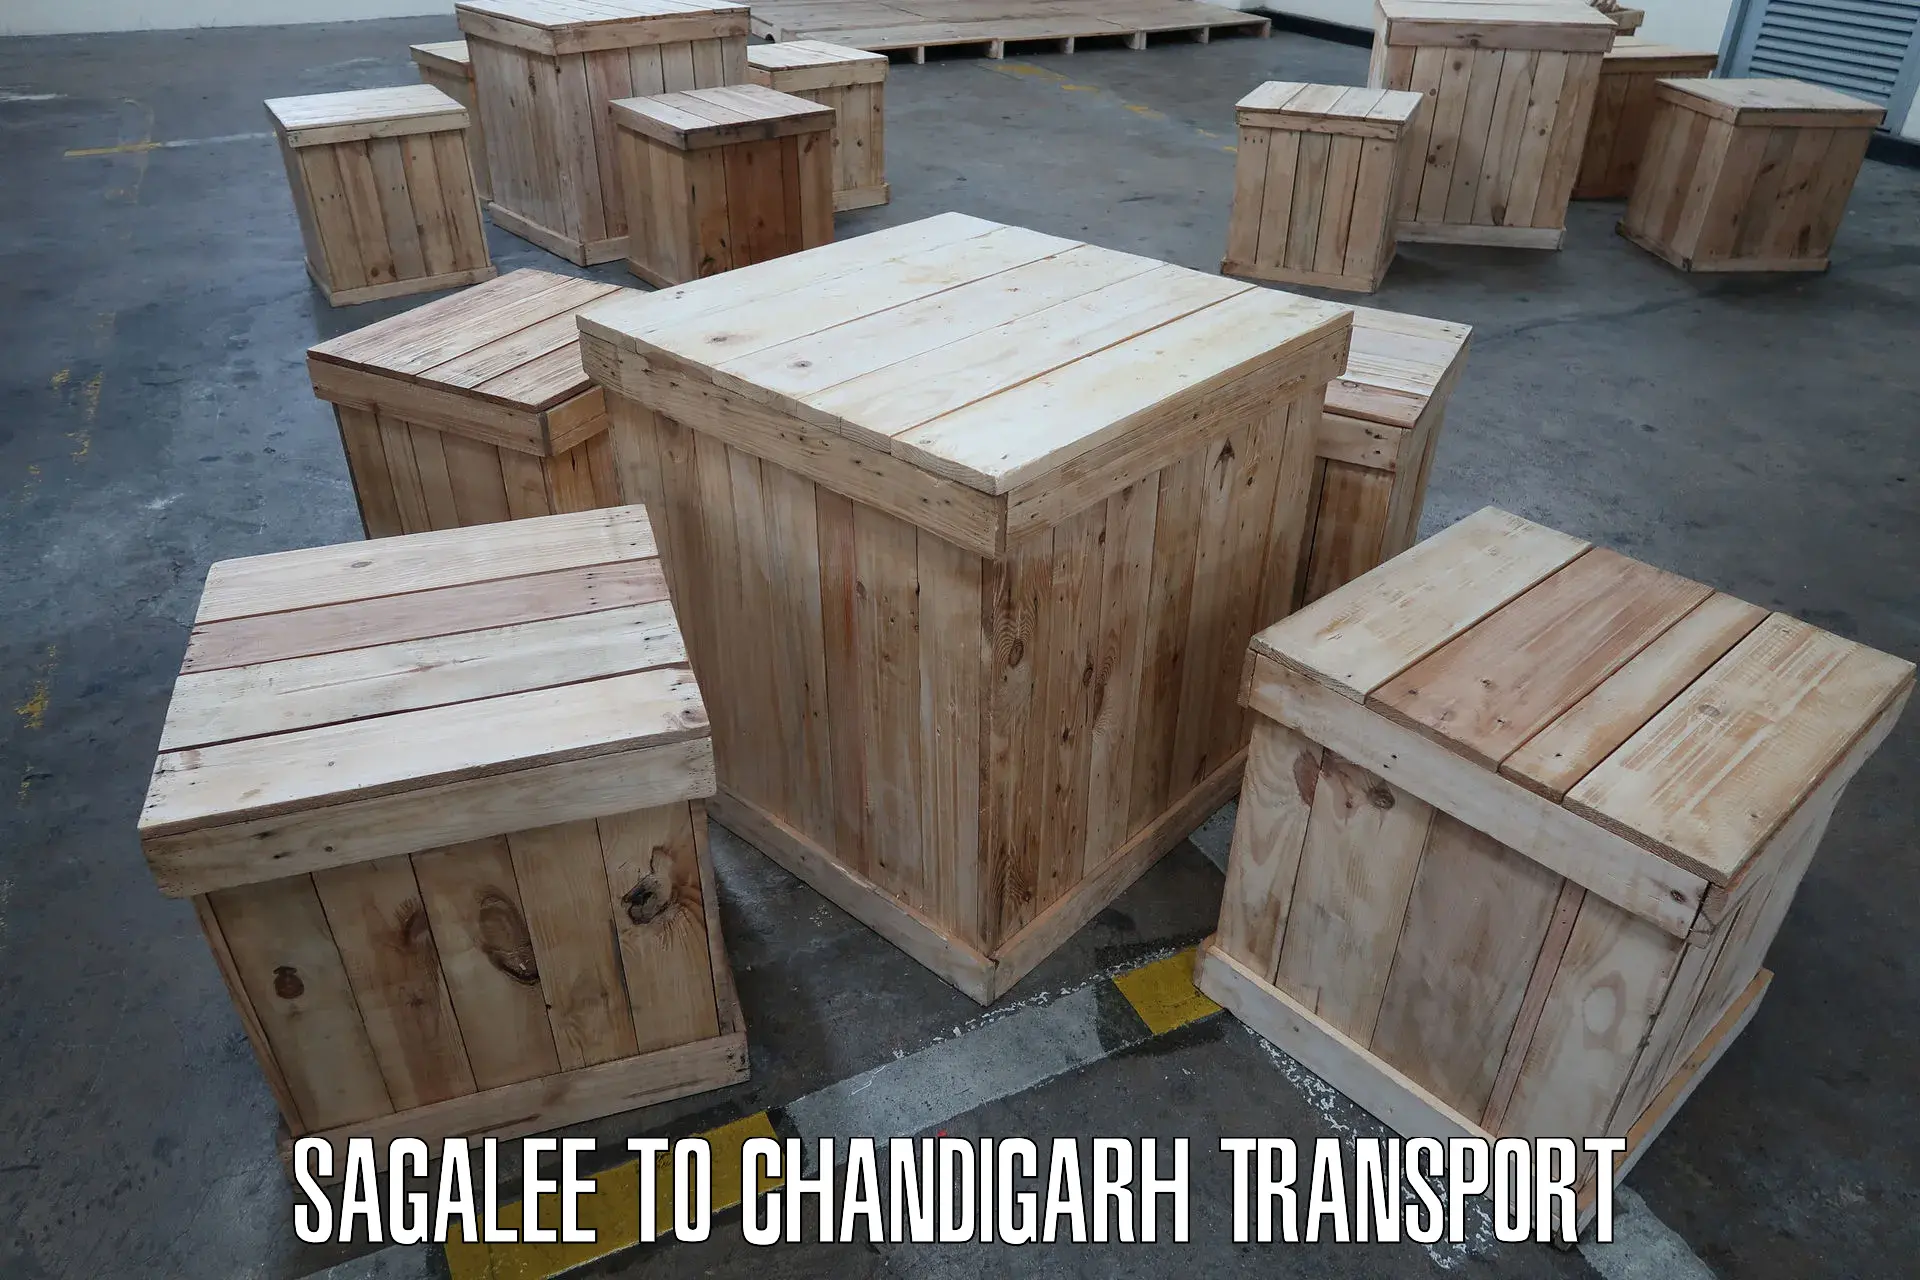 Container transport service Sagalee to Chandigarh